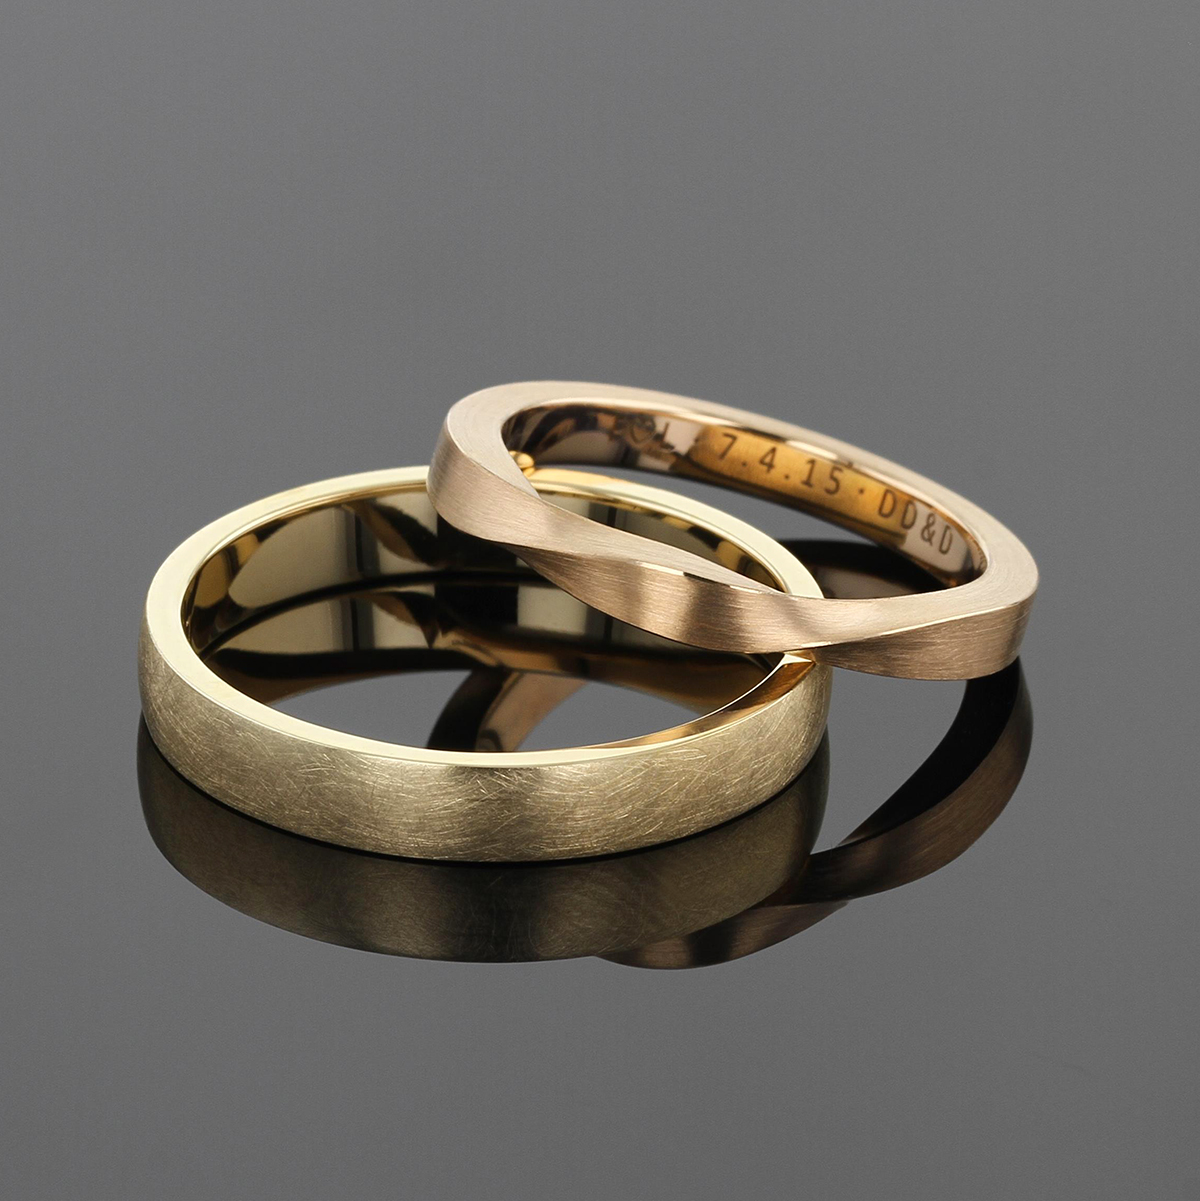 Wedding bands for him and her. A simple band in matted yellow gold for him and a rose gold band with a twisted top for her.